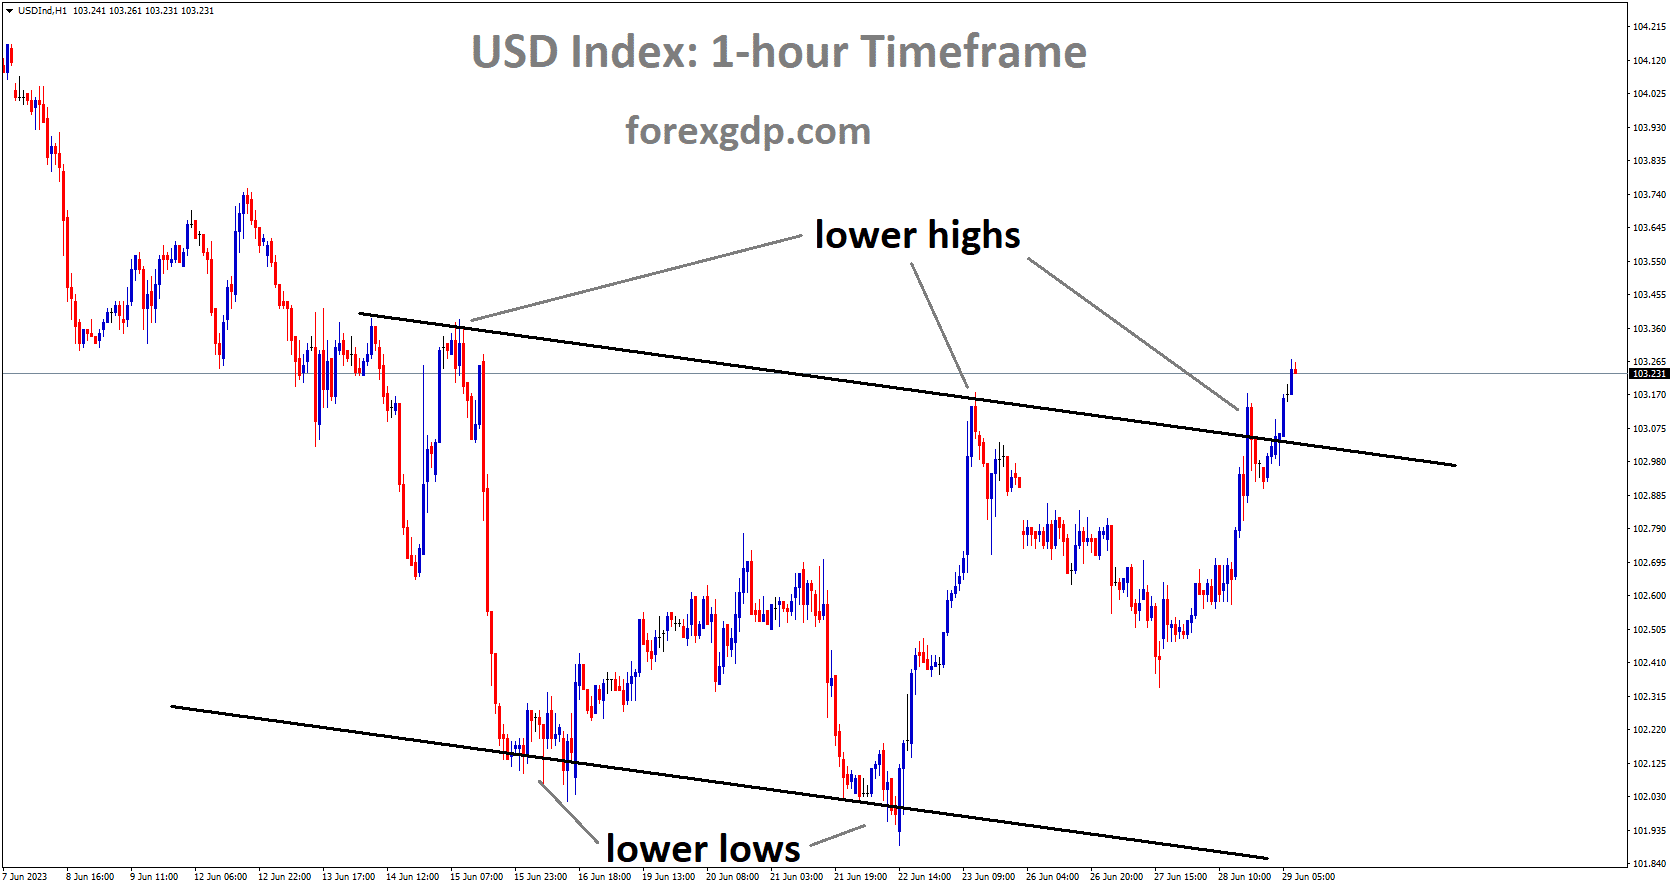 USD Index is moving in descending channel and the market has reached lower high area of the channel.